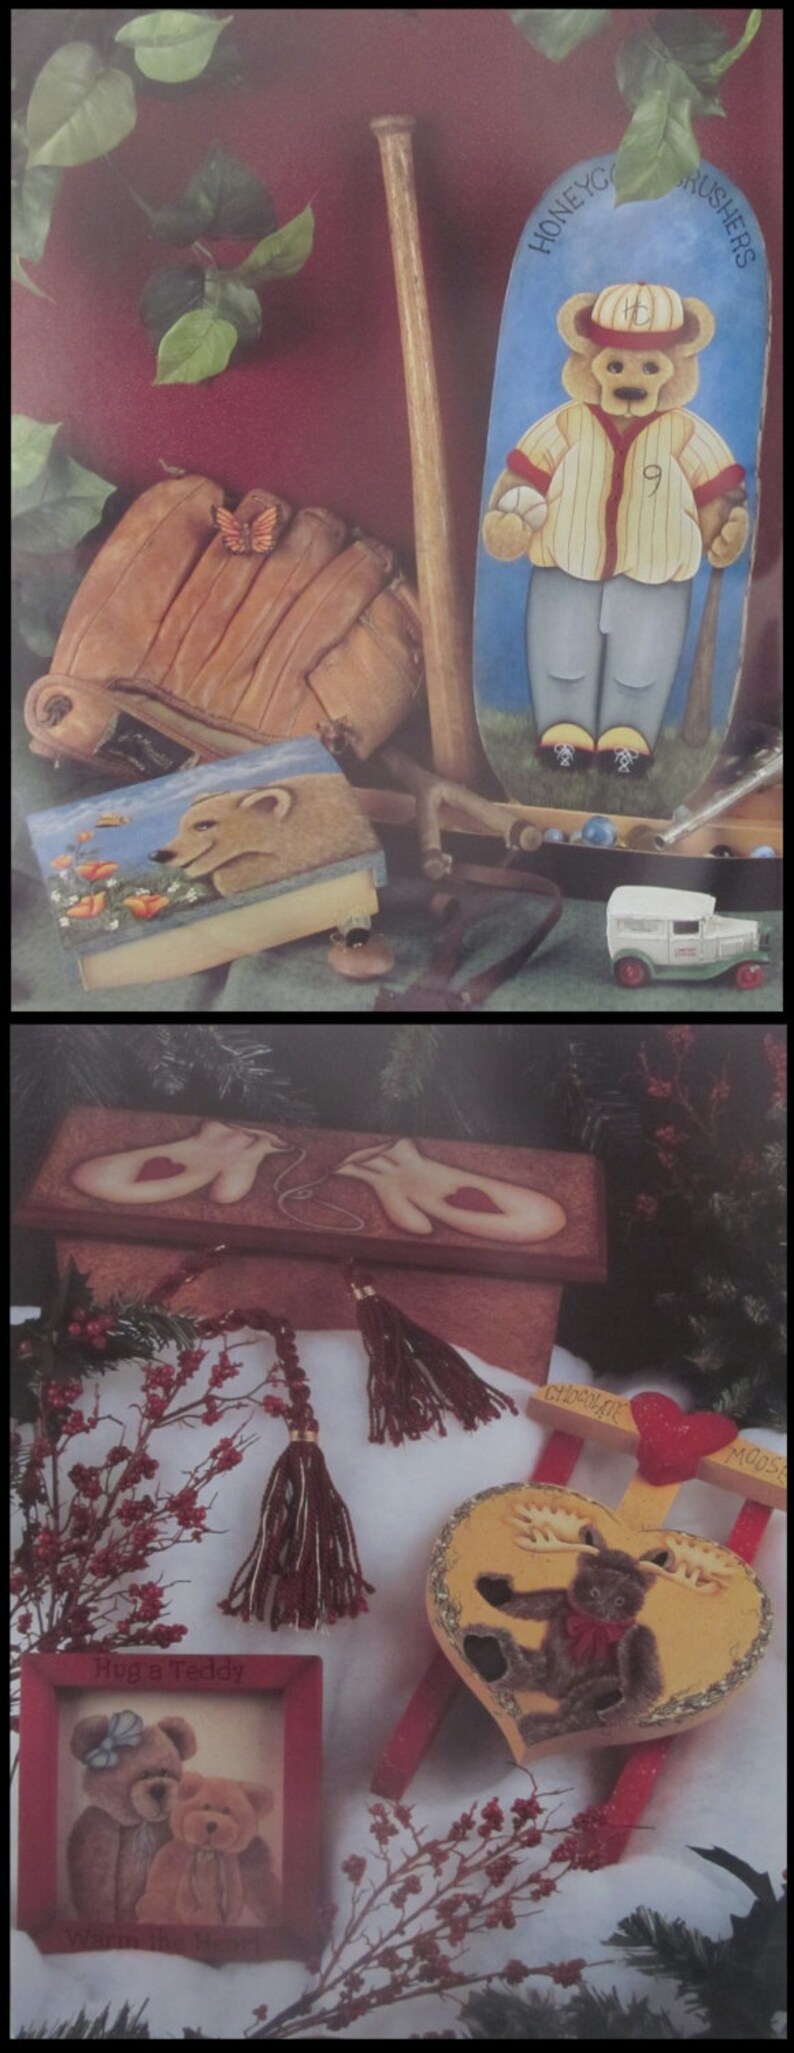 2 Lori Link decorative painting books, Bears & Hares and A Patch of Dreams, DIY Patterns. Bunnies, Teddy Bears and more. image 5